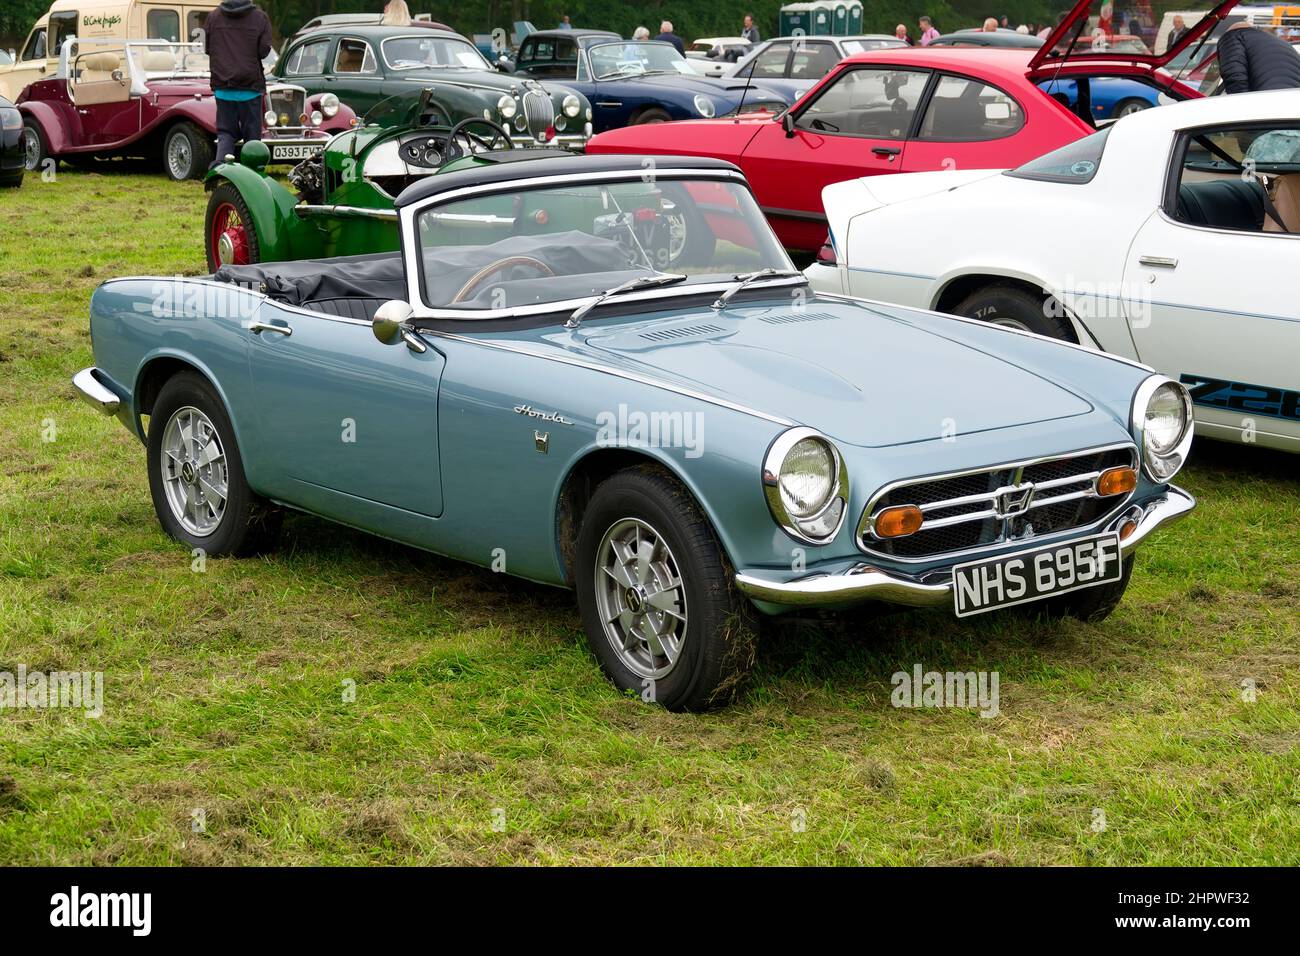 Westbury, Wiltshire, UK - September 5 2021: A 1967 Honda S800  2-Door Roadster Sports Car at the 2021 White Horse Classic and Vintage Car Show Stock Photo